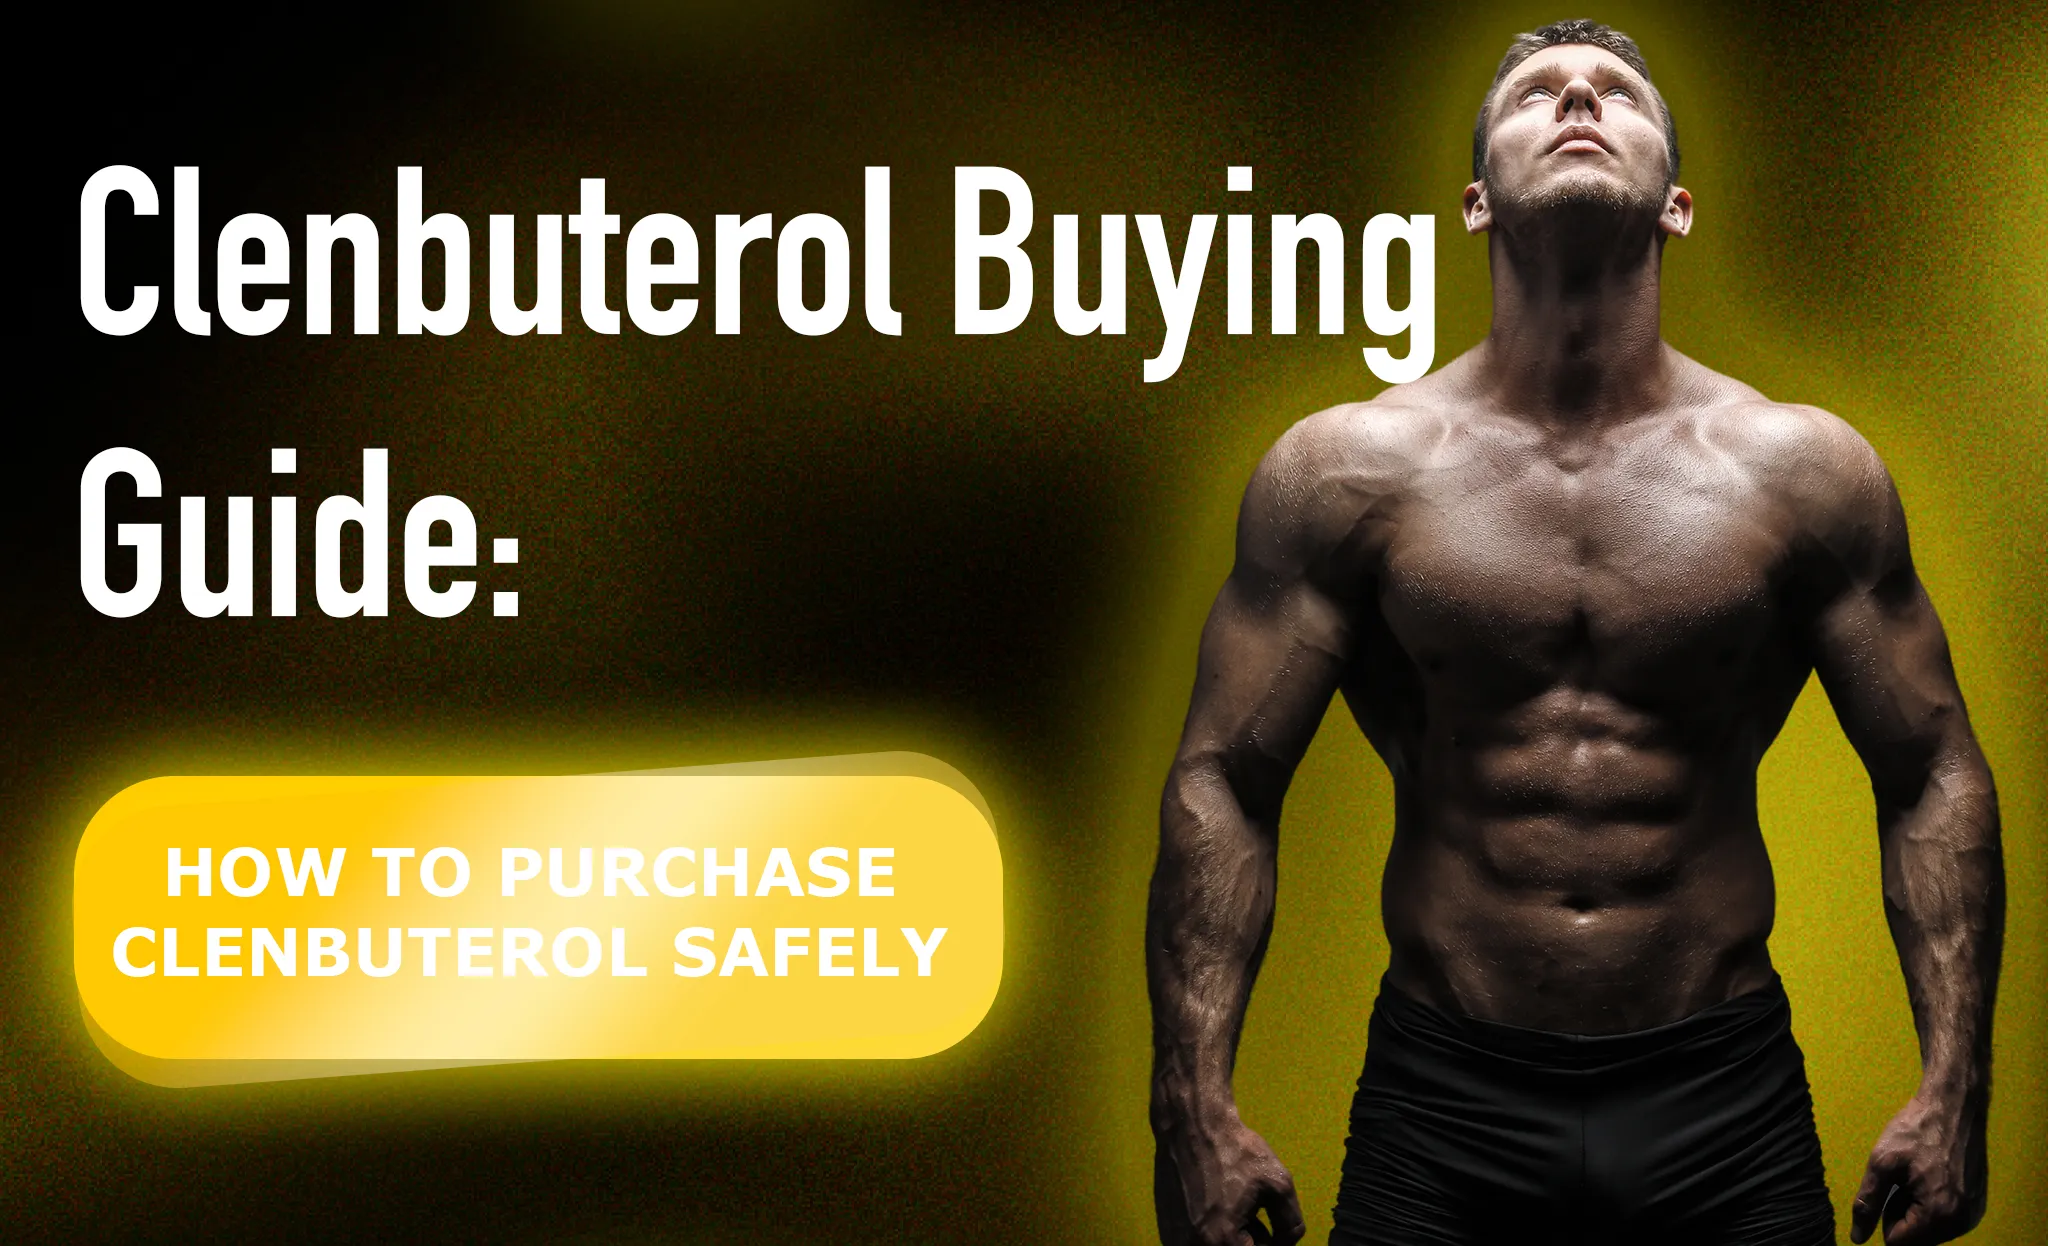 Quality Clenbuterol for Sale